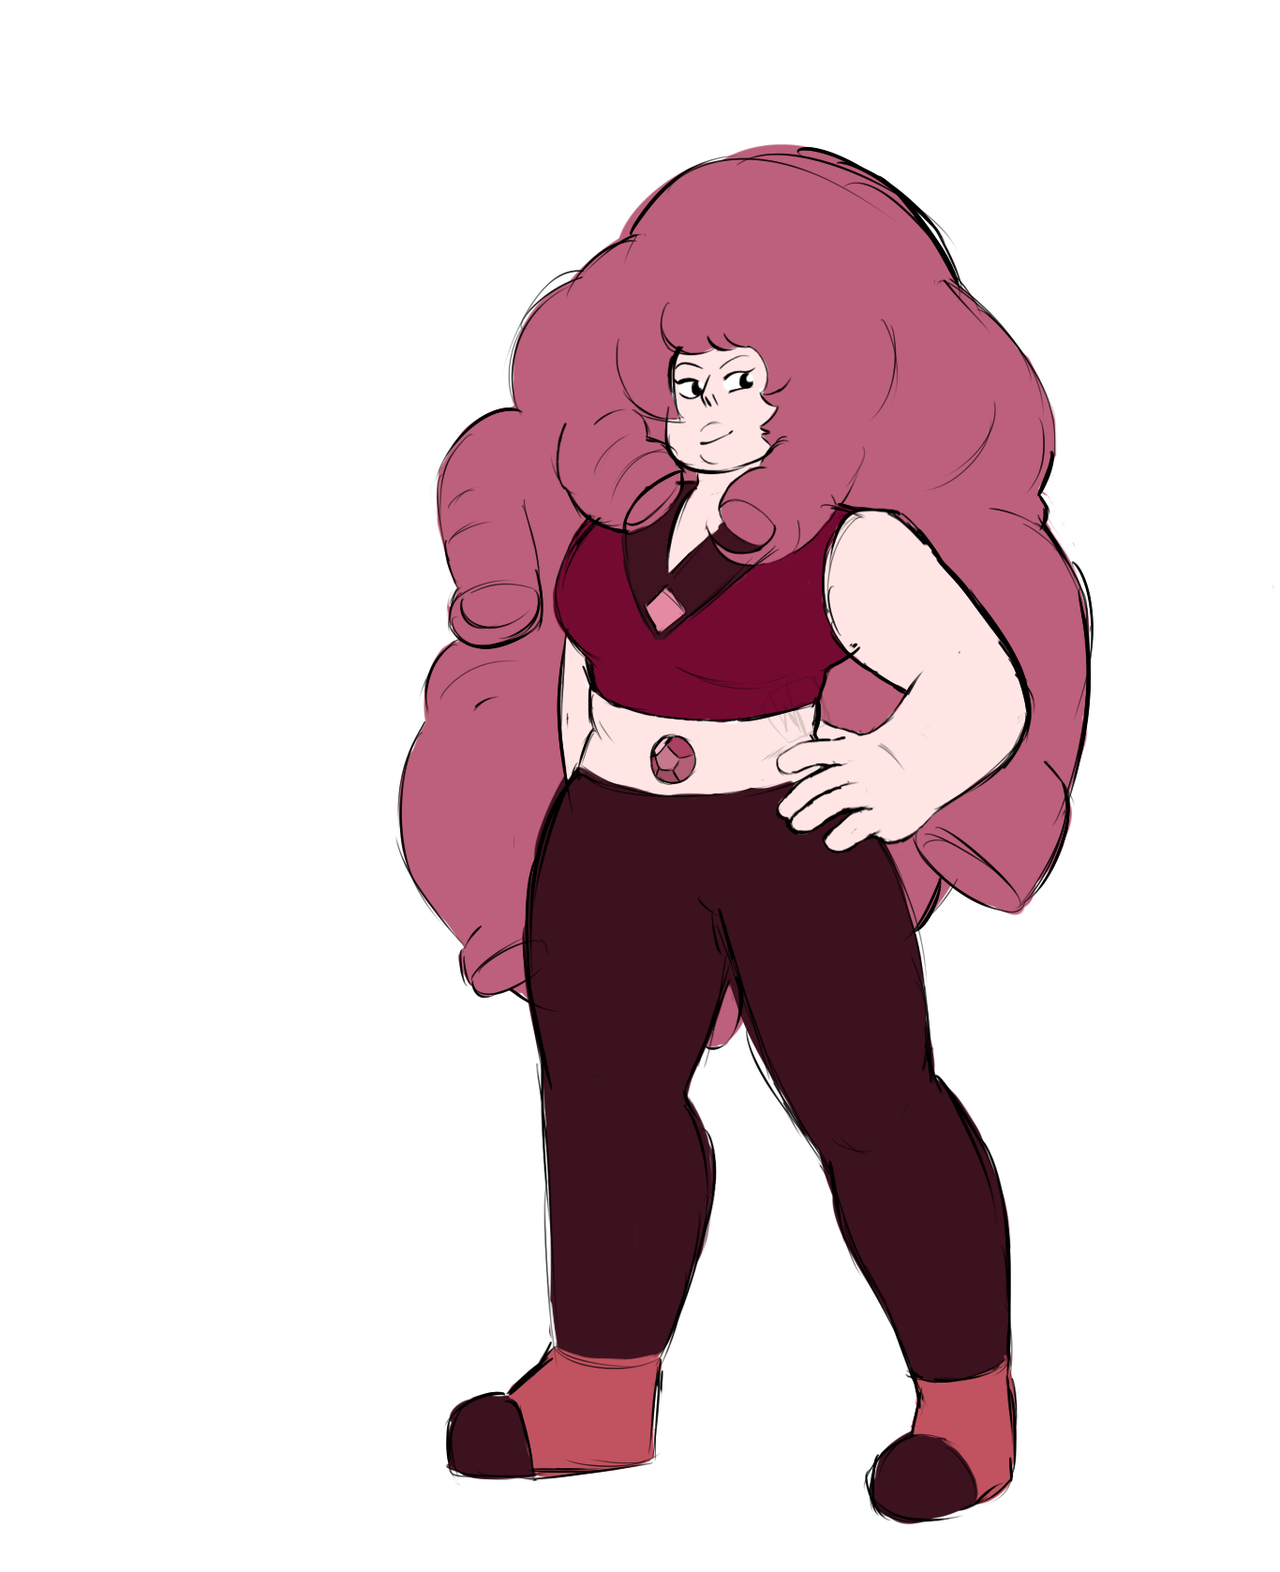 So how about those spoilers of how Homeworld Rose quartz *MIGHT* look like? :>c I seen the keyring post? and I think @hantabe might be right Pearl’s regen outfit isn’t in the sequence we seen and so...